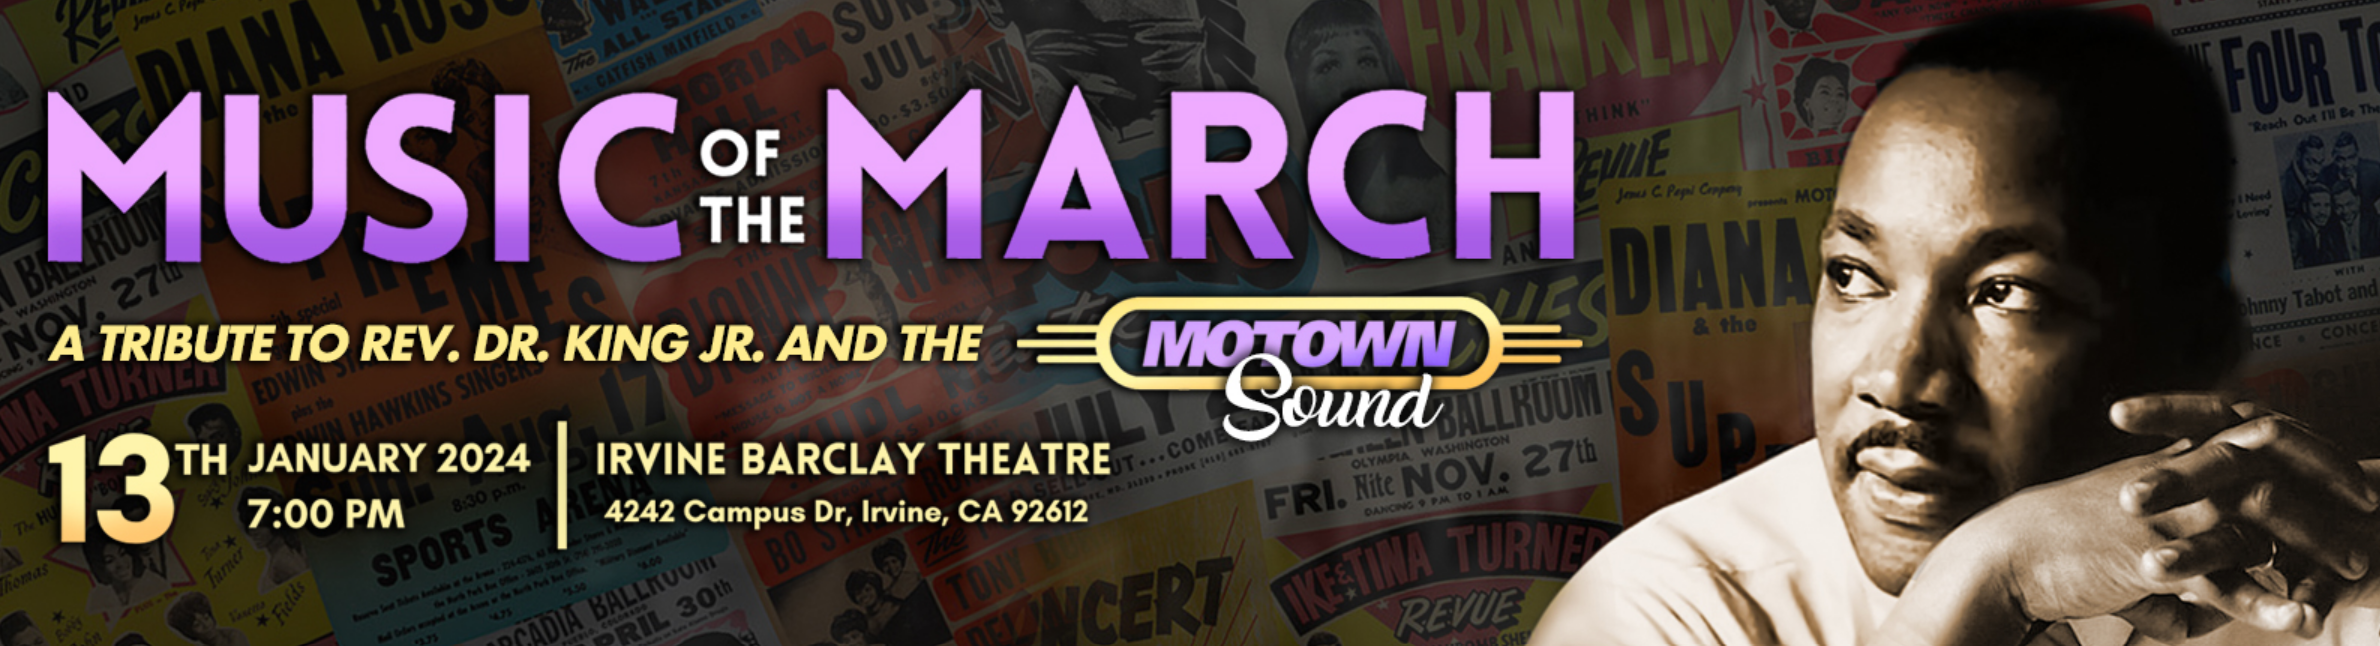 BLACK SINGERS/ACTORS/DANCERS NOV AUDITION - MUSIC OF THE MARCH: A TRIBUTE TO DR. MARTIN LUTHER KING & THE MOTOWN SOUND